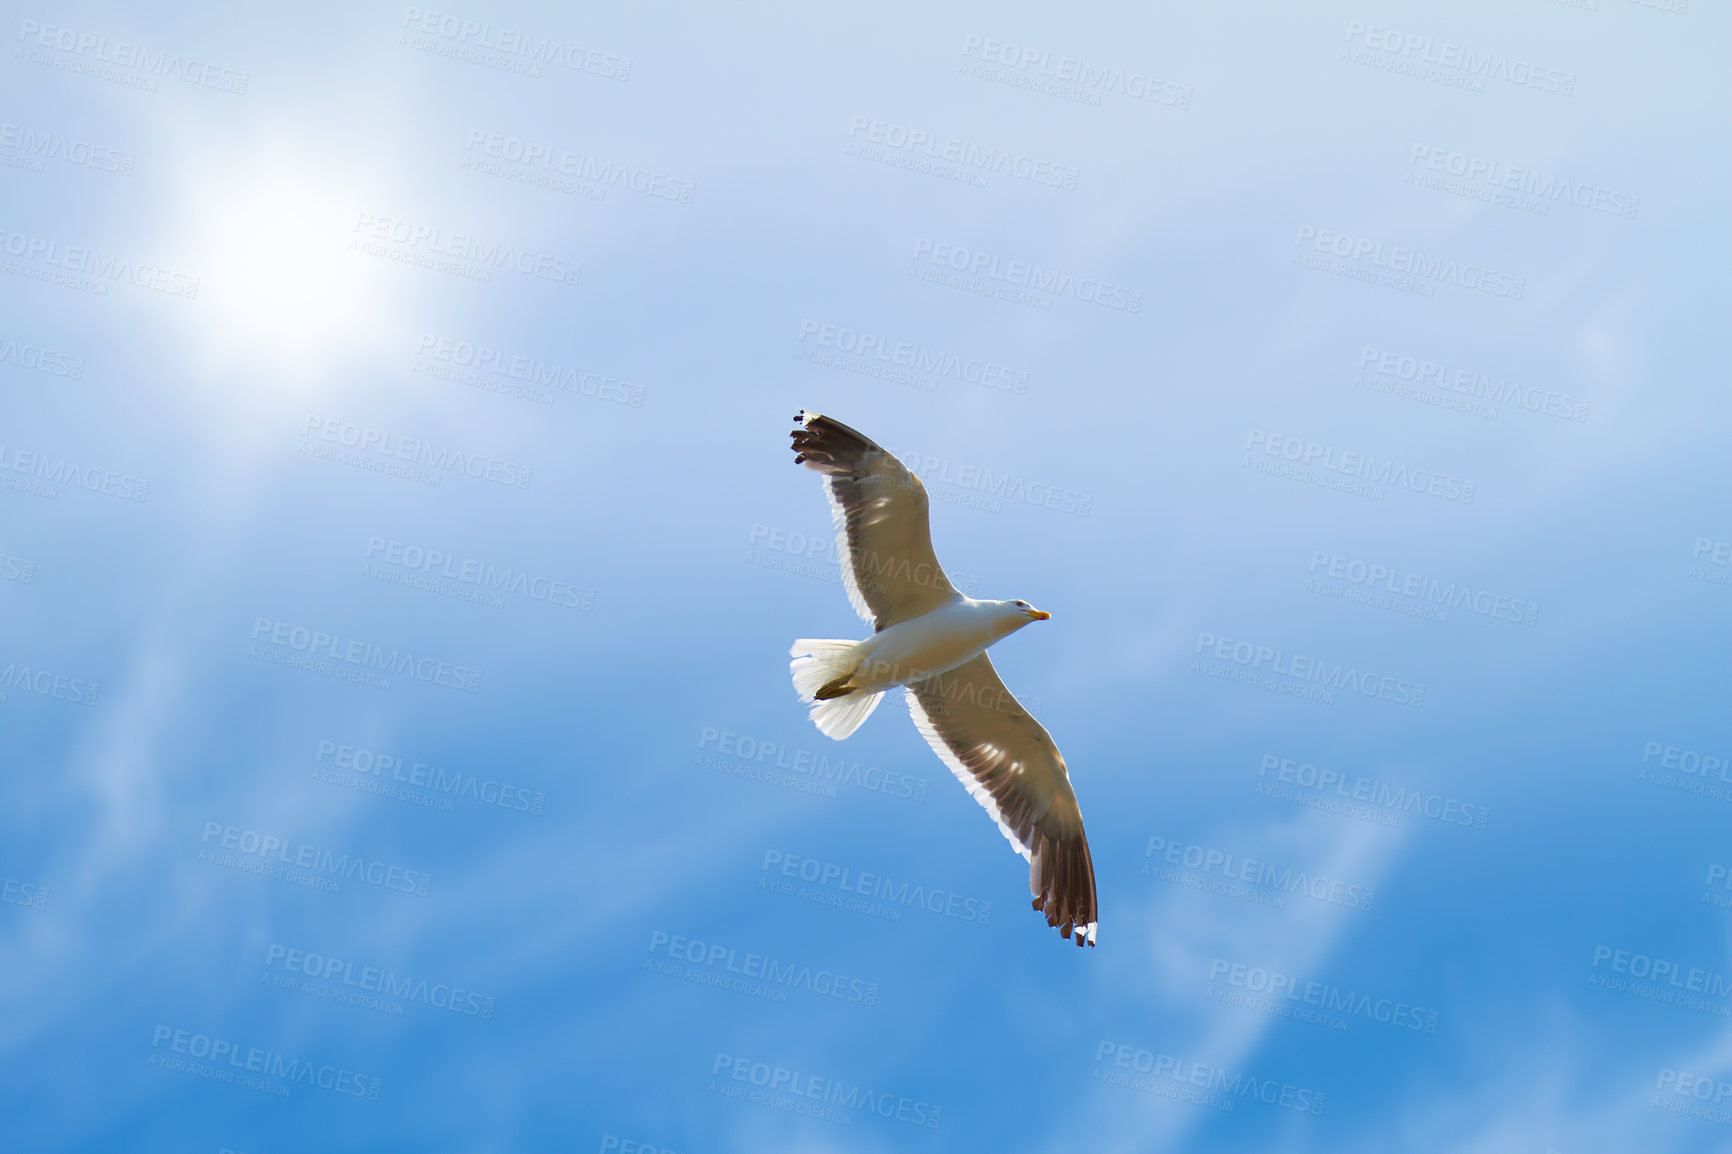 Buy stock photo Low angle view of flying seagull isolated against blue sky background, a sun, copy space. White bird soaring alone searching for nesting grounds. Birdwatching migratory avian wildlife looking of food